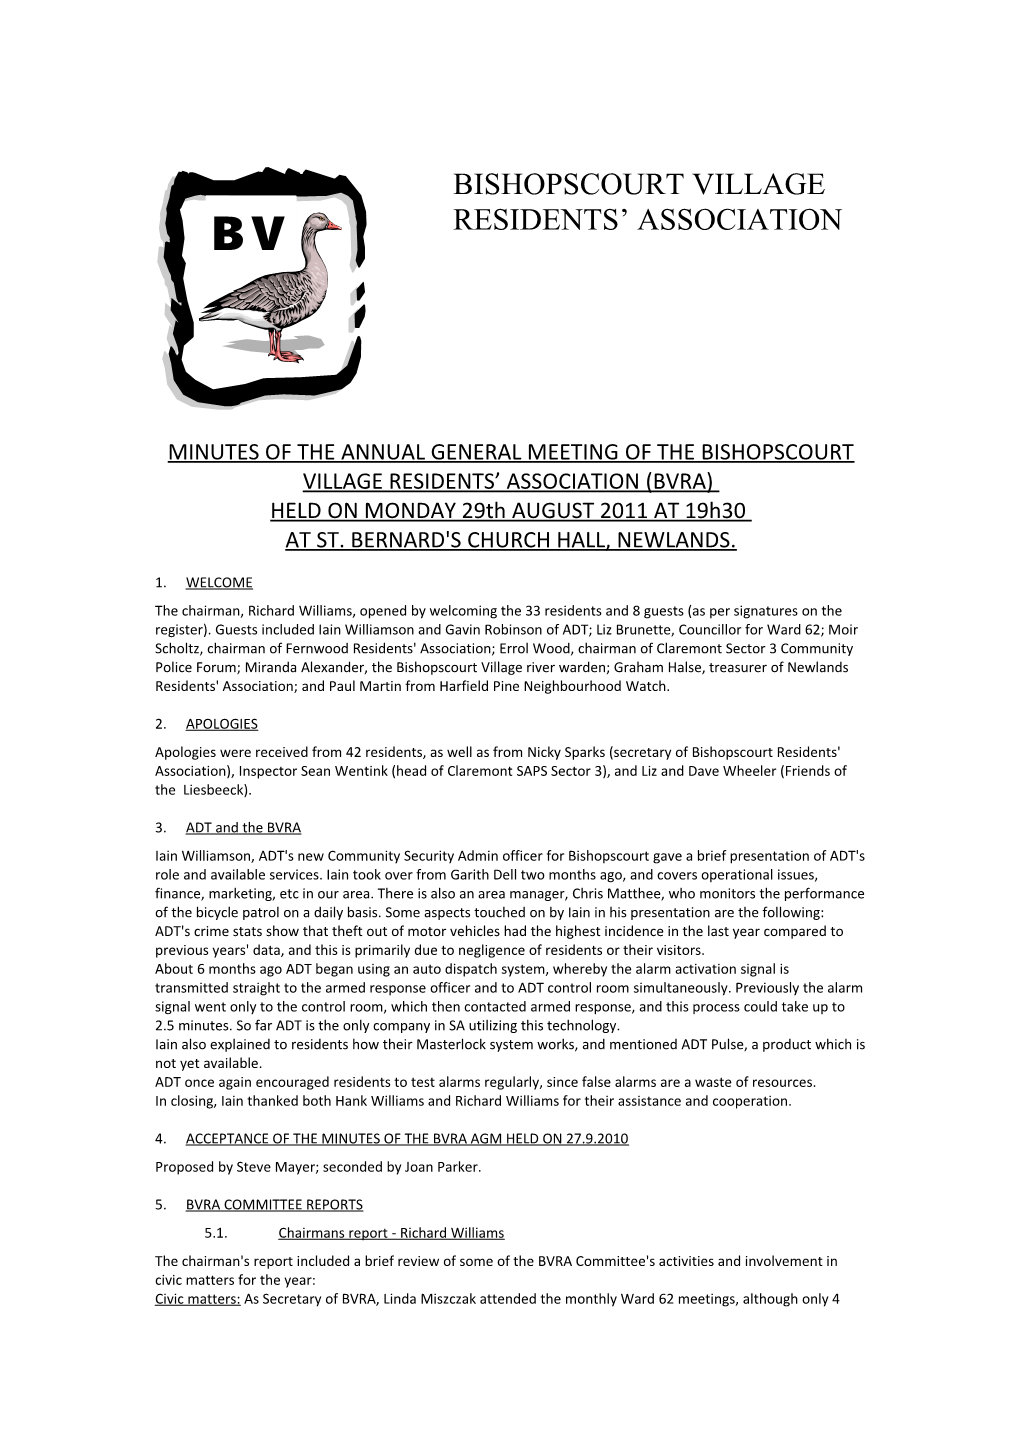 Minutes of the Annual General Meeting of the Bishopscourt Village Residents Association (Bvra)